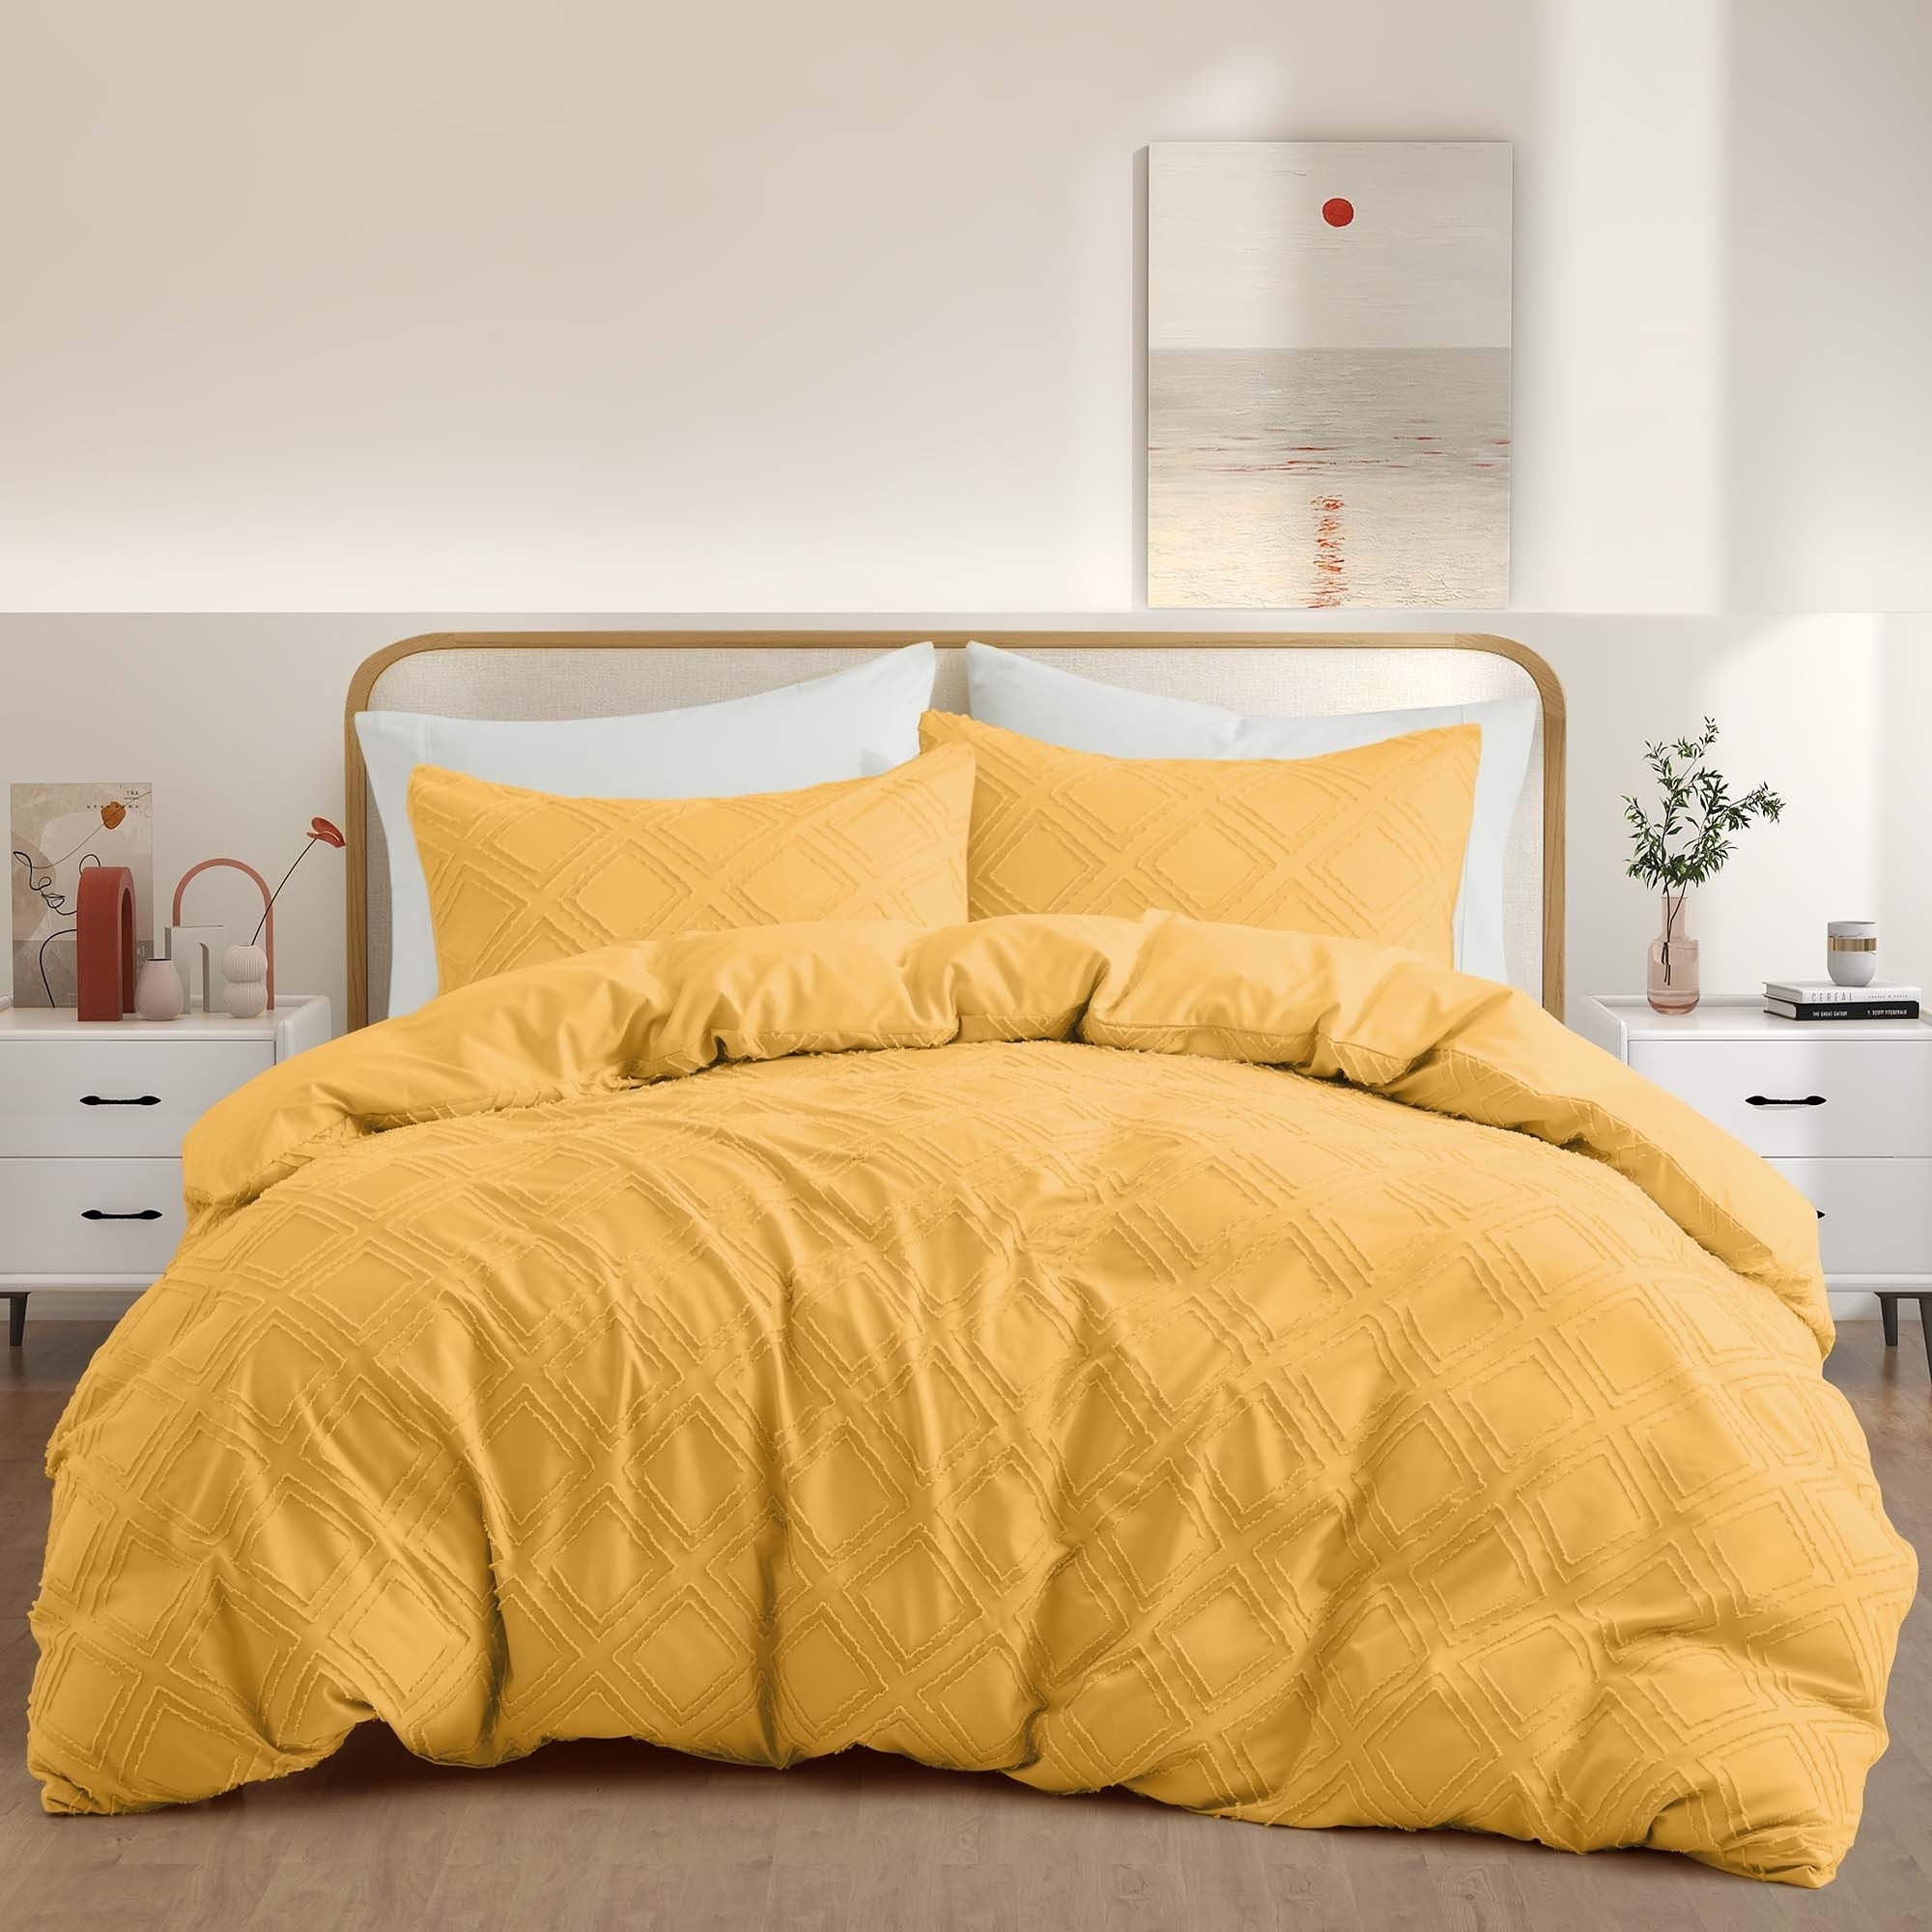 Basic Bedding Sets With All Season Goose Down Feather Comforter, 2 Pack Goose Down Pillows, Duvet Cover Set - Yellow Bundles Option, Full/Qu